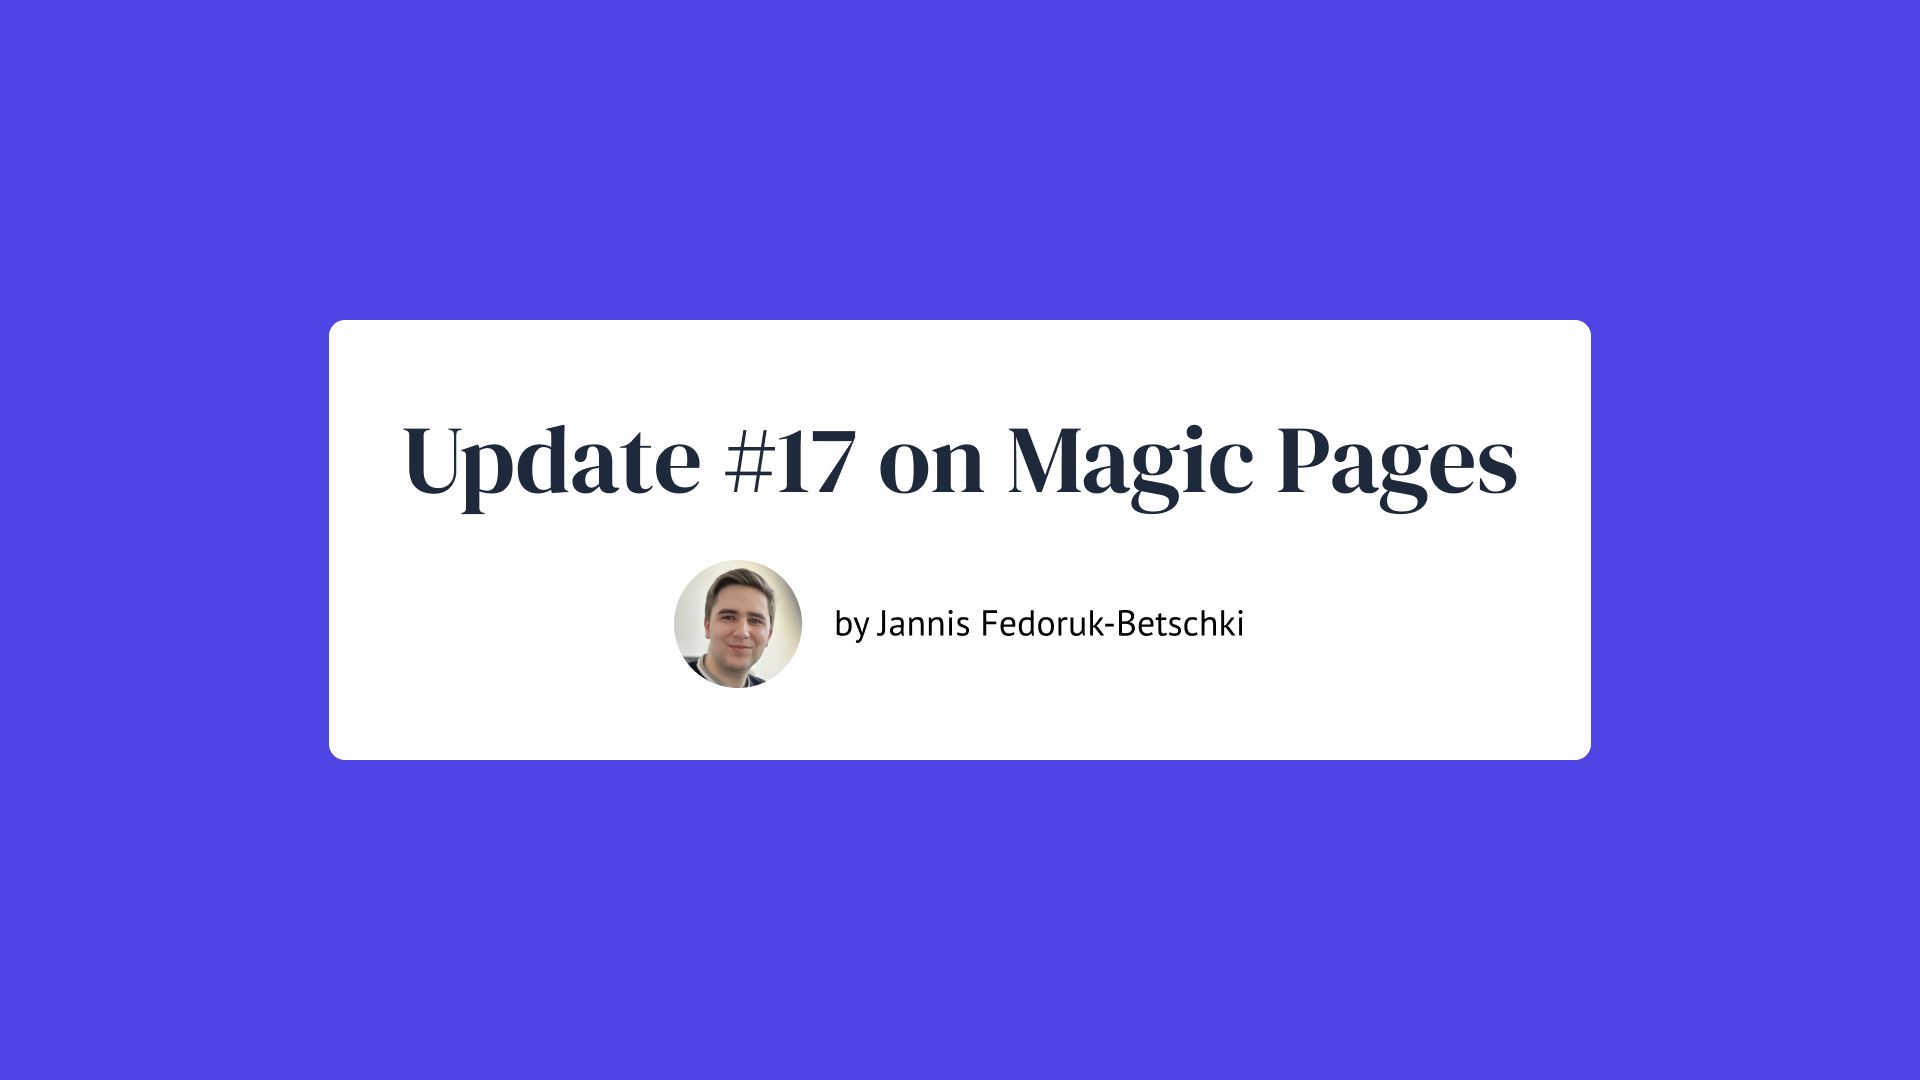 Update #17 on Magic Pages